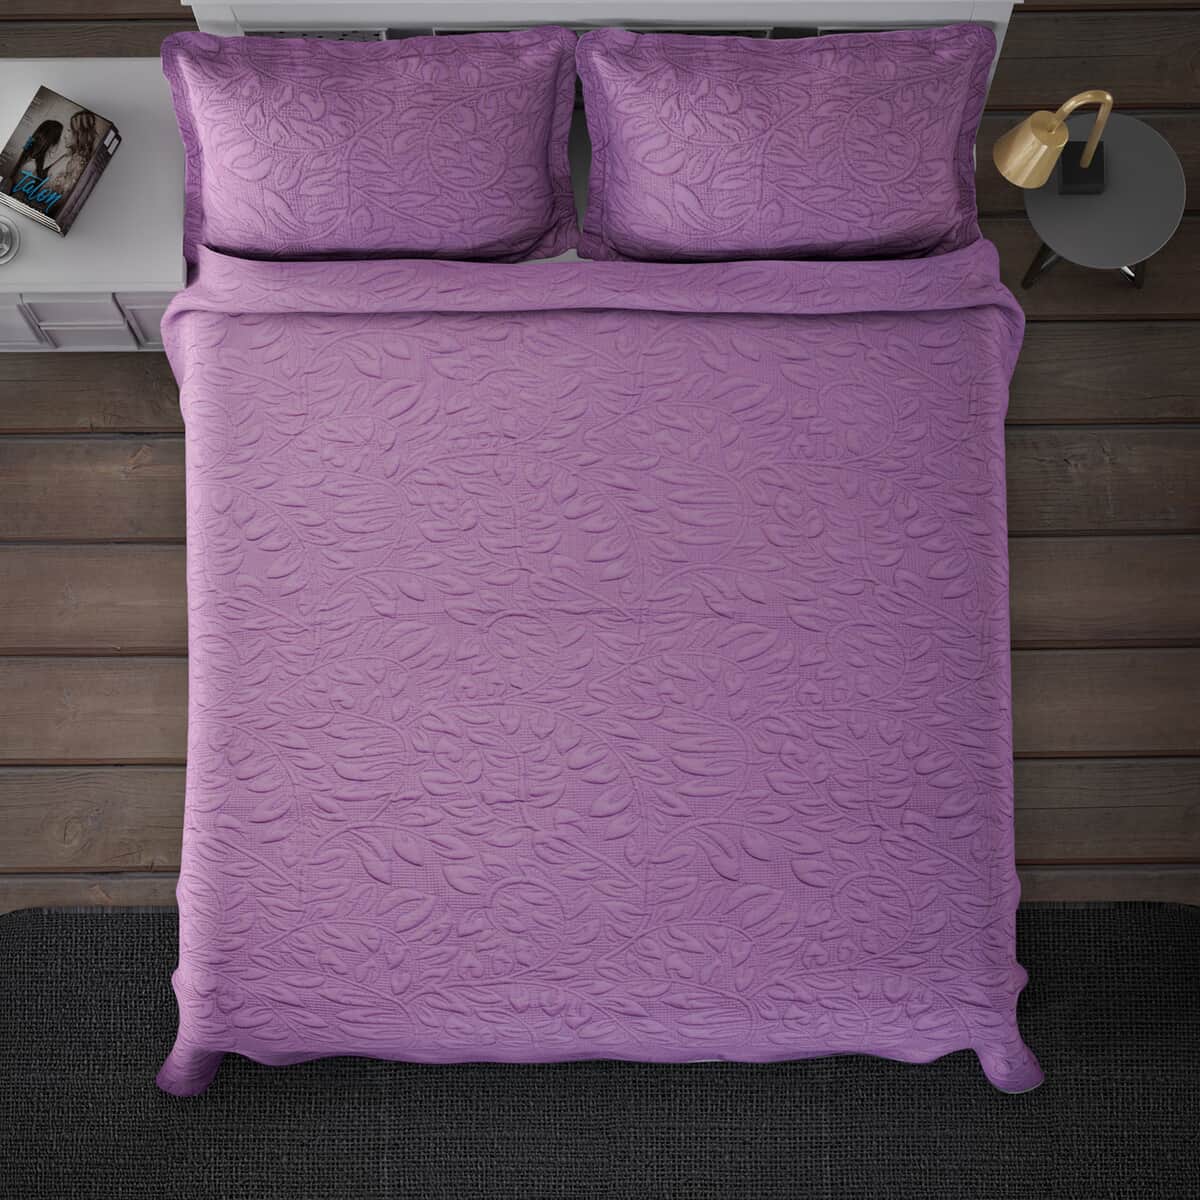 Homesmart Mauve 3D Pinsonic Embossed Pattern Quilt with 2 Shams - Queen (Microfiber) image number 2